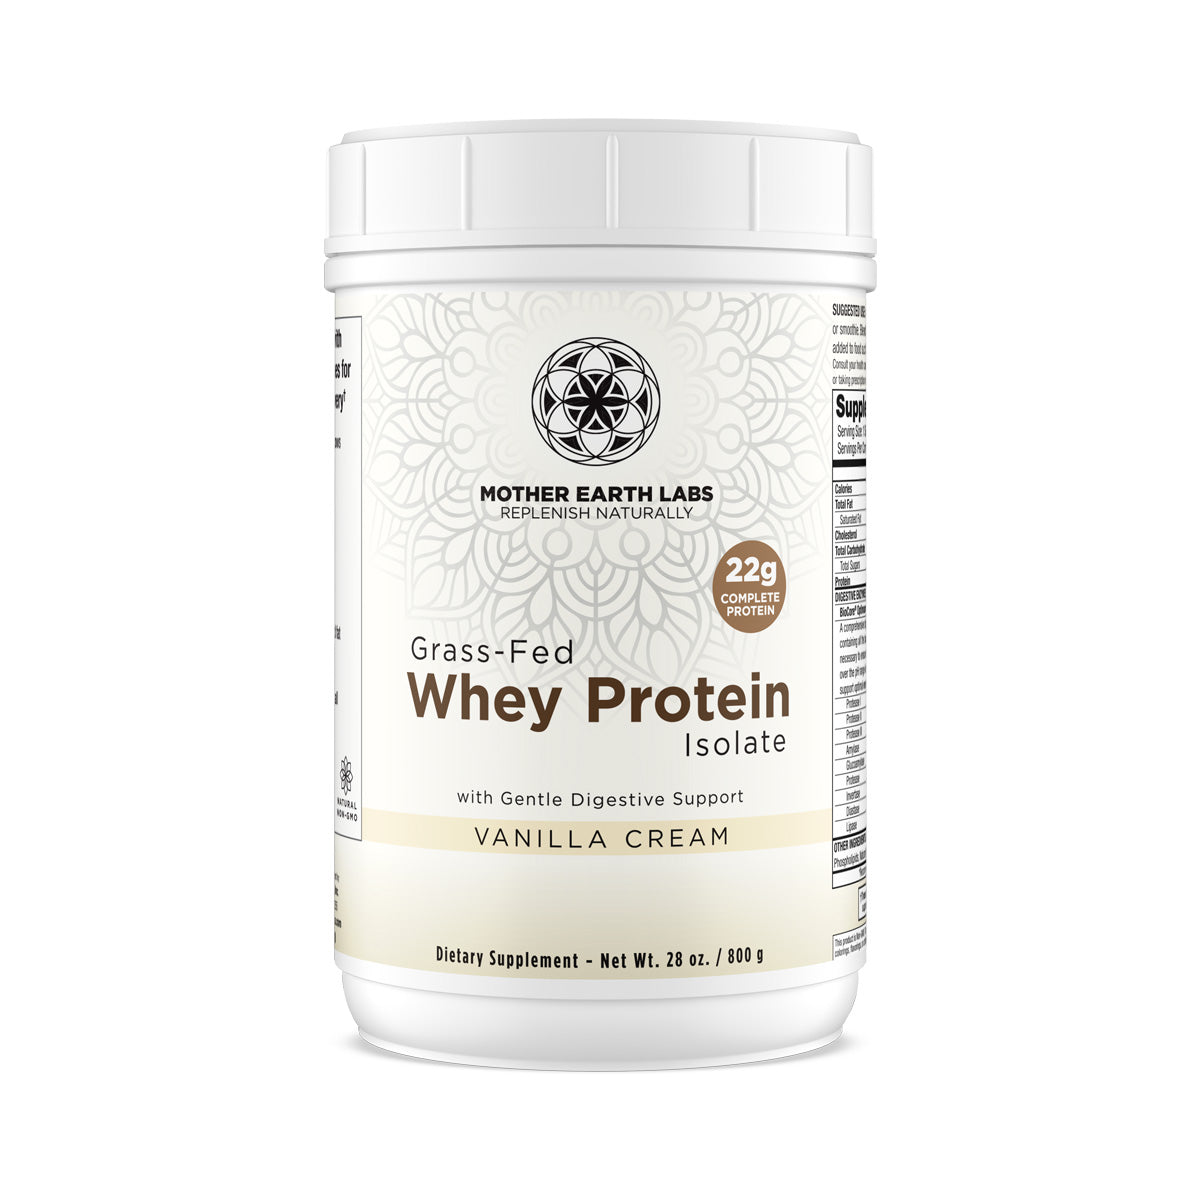 Grass-Fed Whey Protein Isolate (Vanilla Cream Flavour) - 907g | Mother Earth Labs